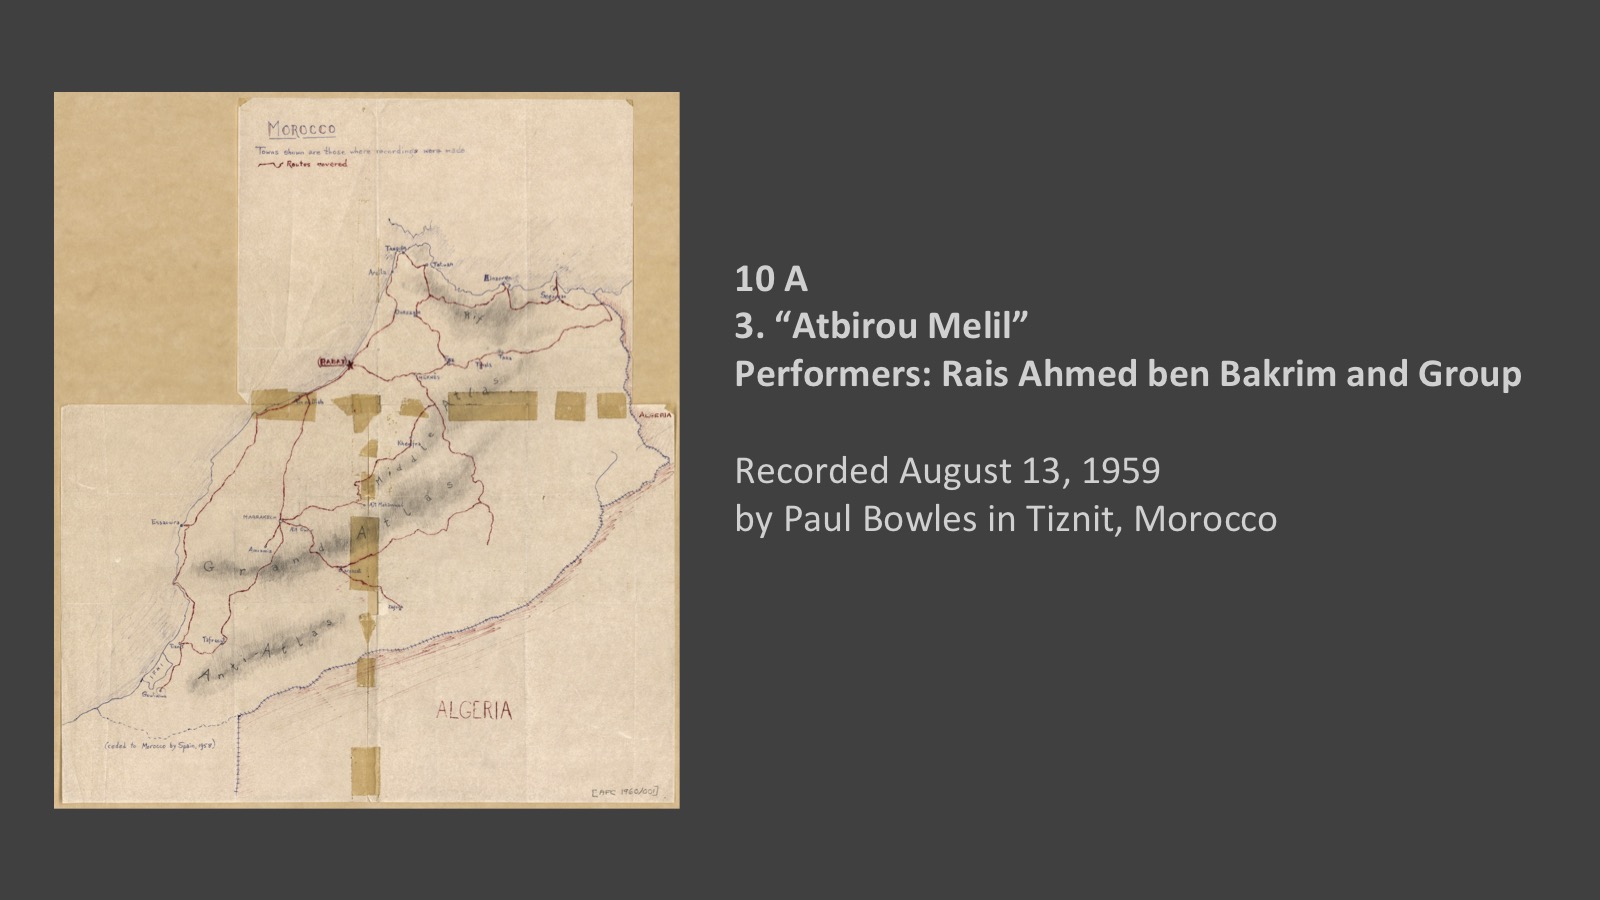 10 A
3. “Atbirou Melil”
Performers: Rais Ahmed ben Bakrim and Group

Recorded August 13, 1959
by Paul Bowles in Tiznit, Morocco
